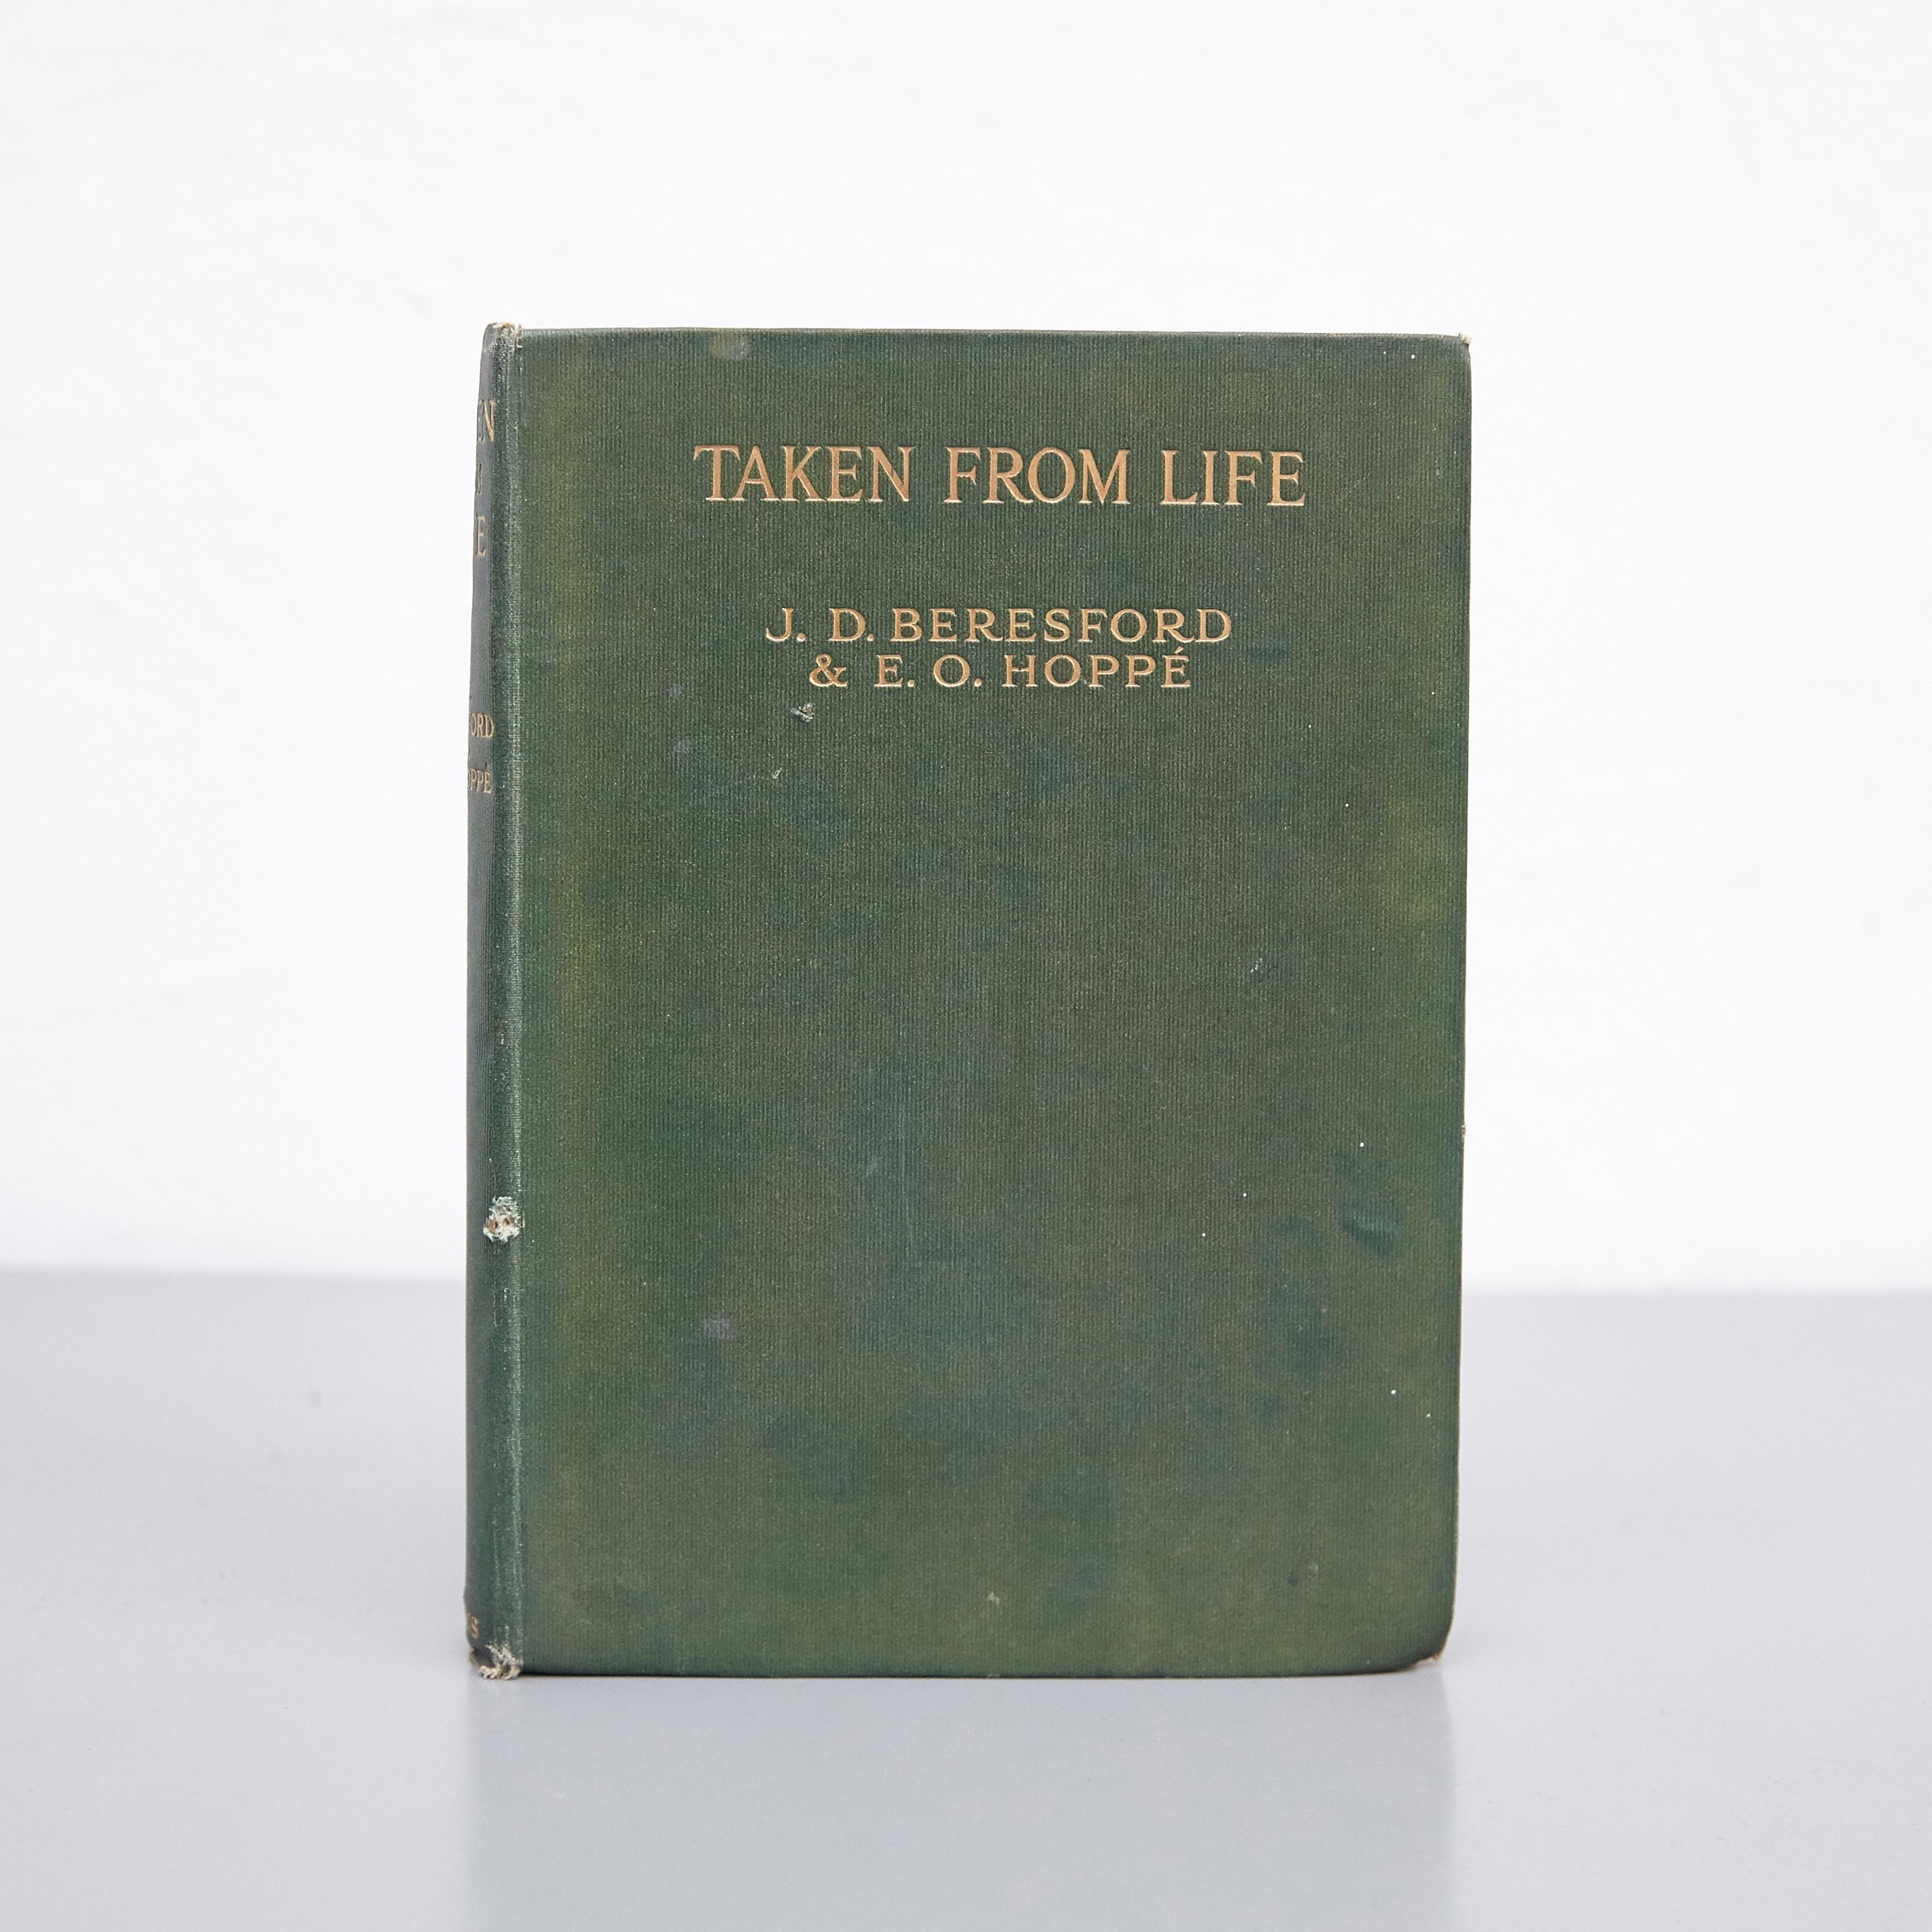 Book Published by W. COLLINS SONS & CO. LTD., London, Glasgow, Melbourne, Auckland 1922.

E. O. (Emil Otto) Hoppé’s photographs bring English writer J. D. (John Davys) Beresford’s seven biographies to life. This is especially fascinating, as